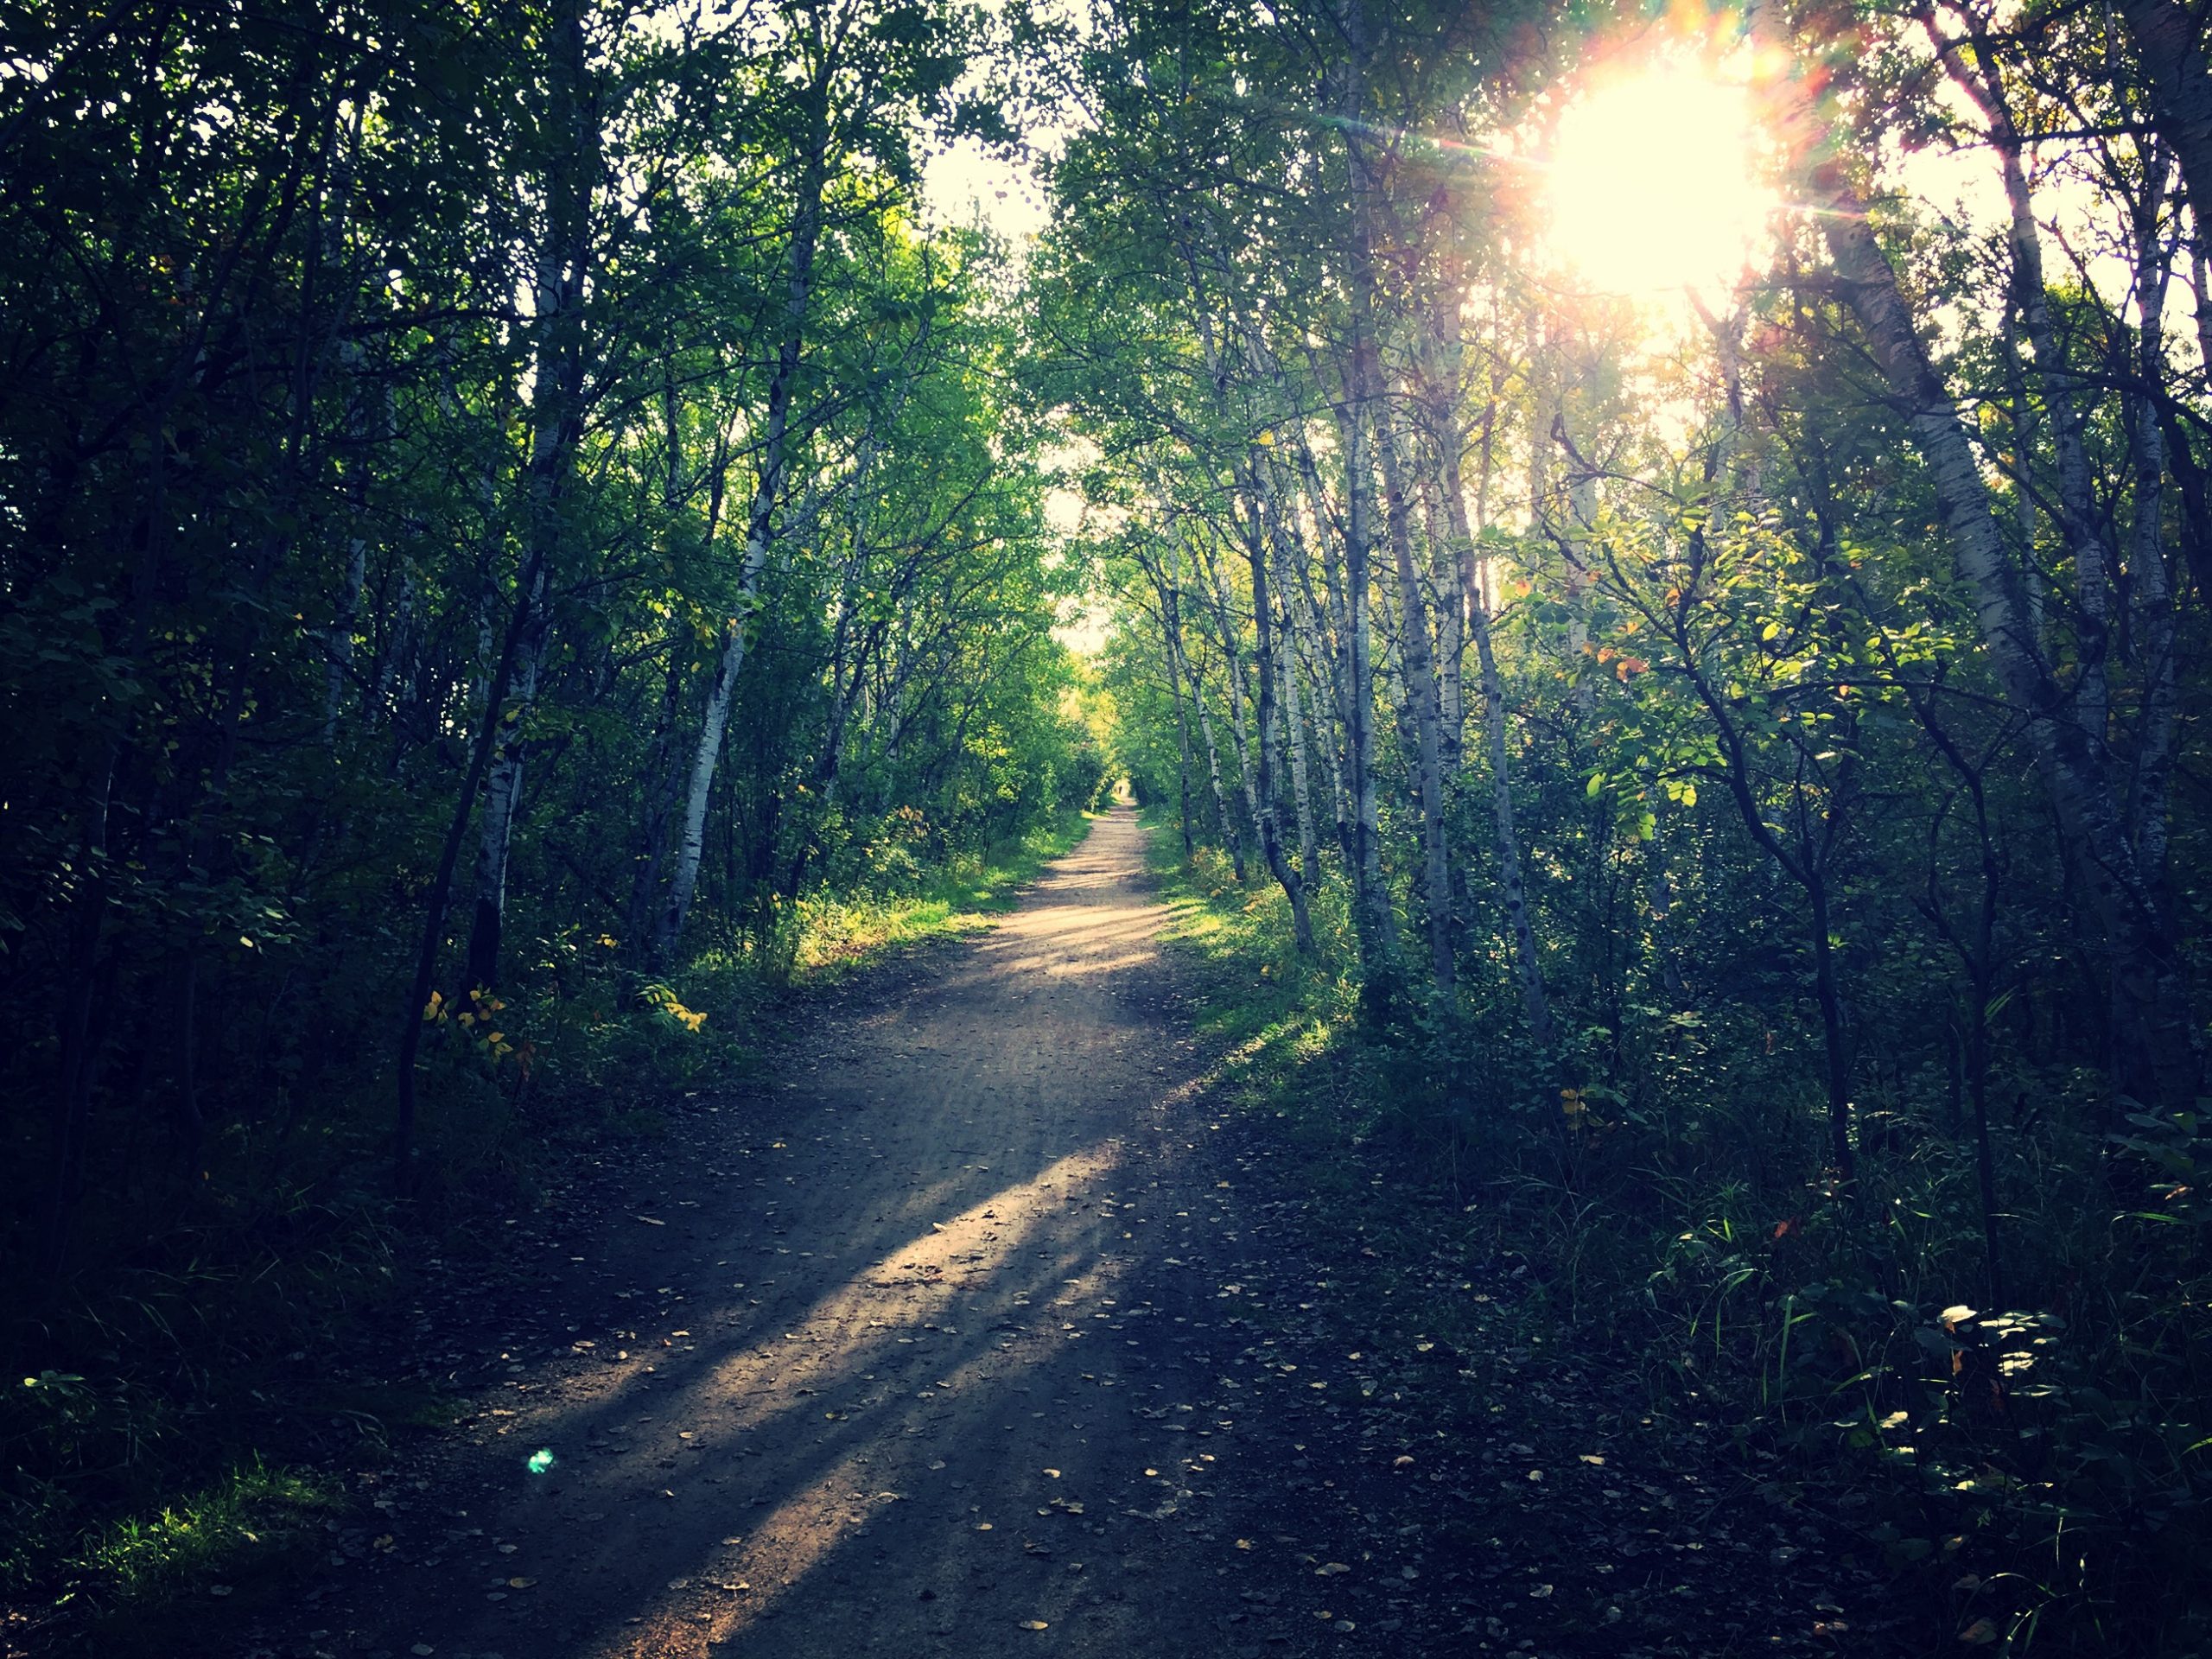 Featured image for “PROVINCE INVESTING ADDITIONAL $2.5 MILLION IN TRAILS TO SUPPORT OUTDOOR RECREATION OPPORTUNITIES FOR MANITOBANS”